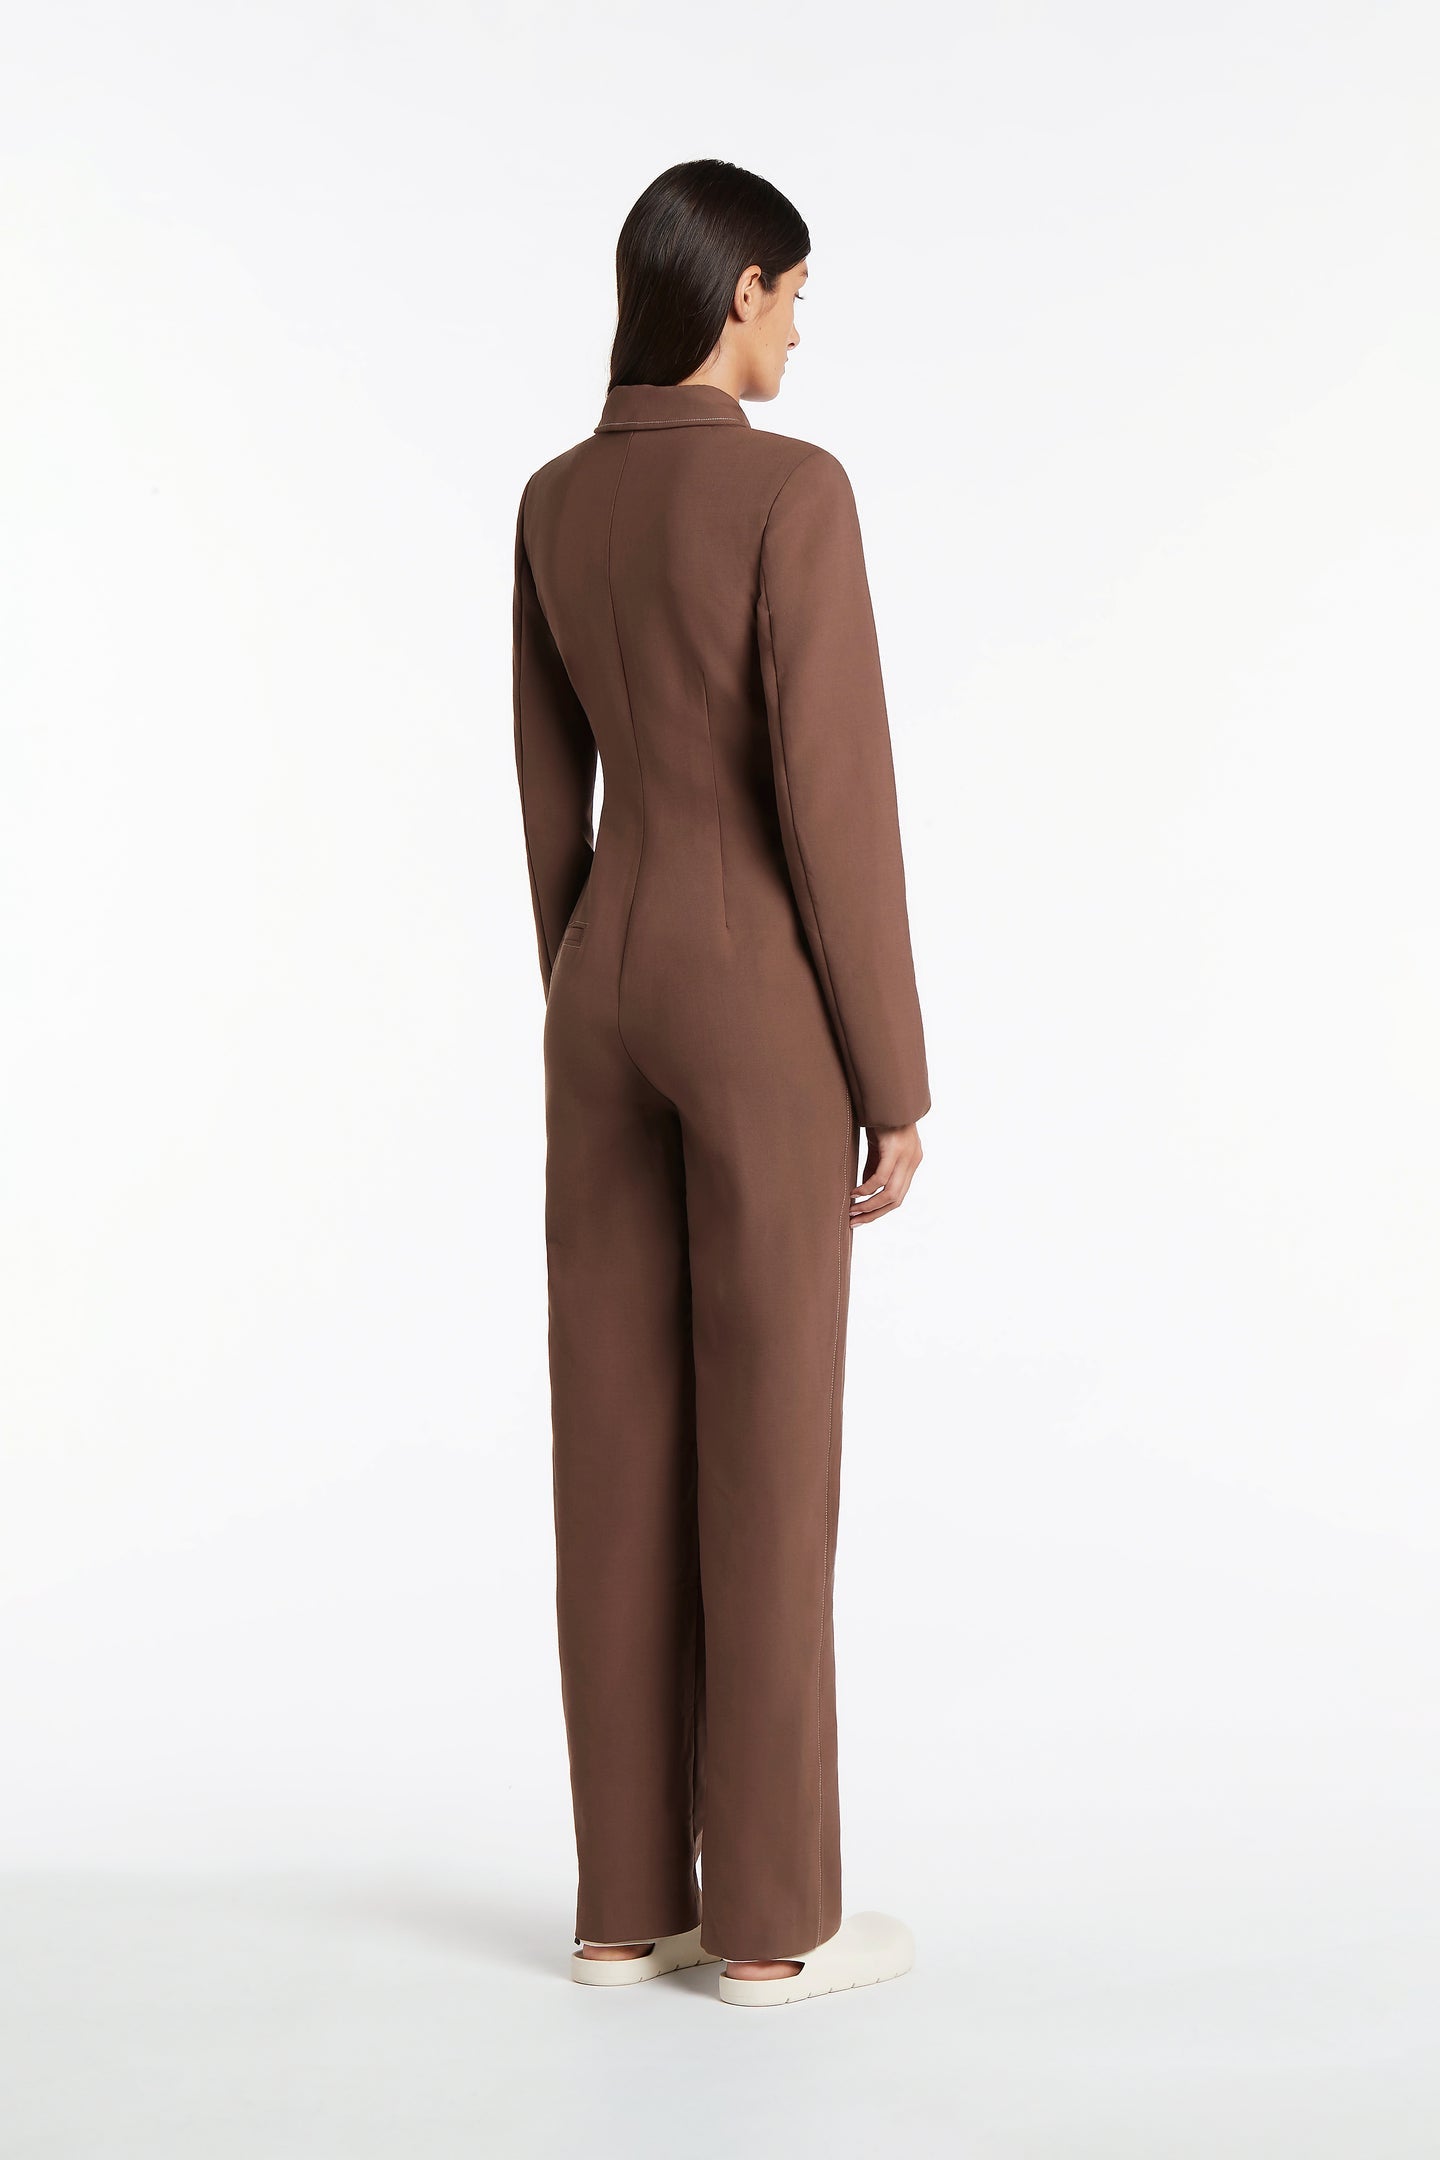 SIR THE LABEL | Adrien Jumpsuit - Chocolate